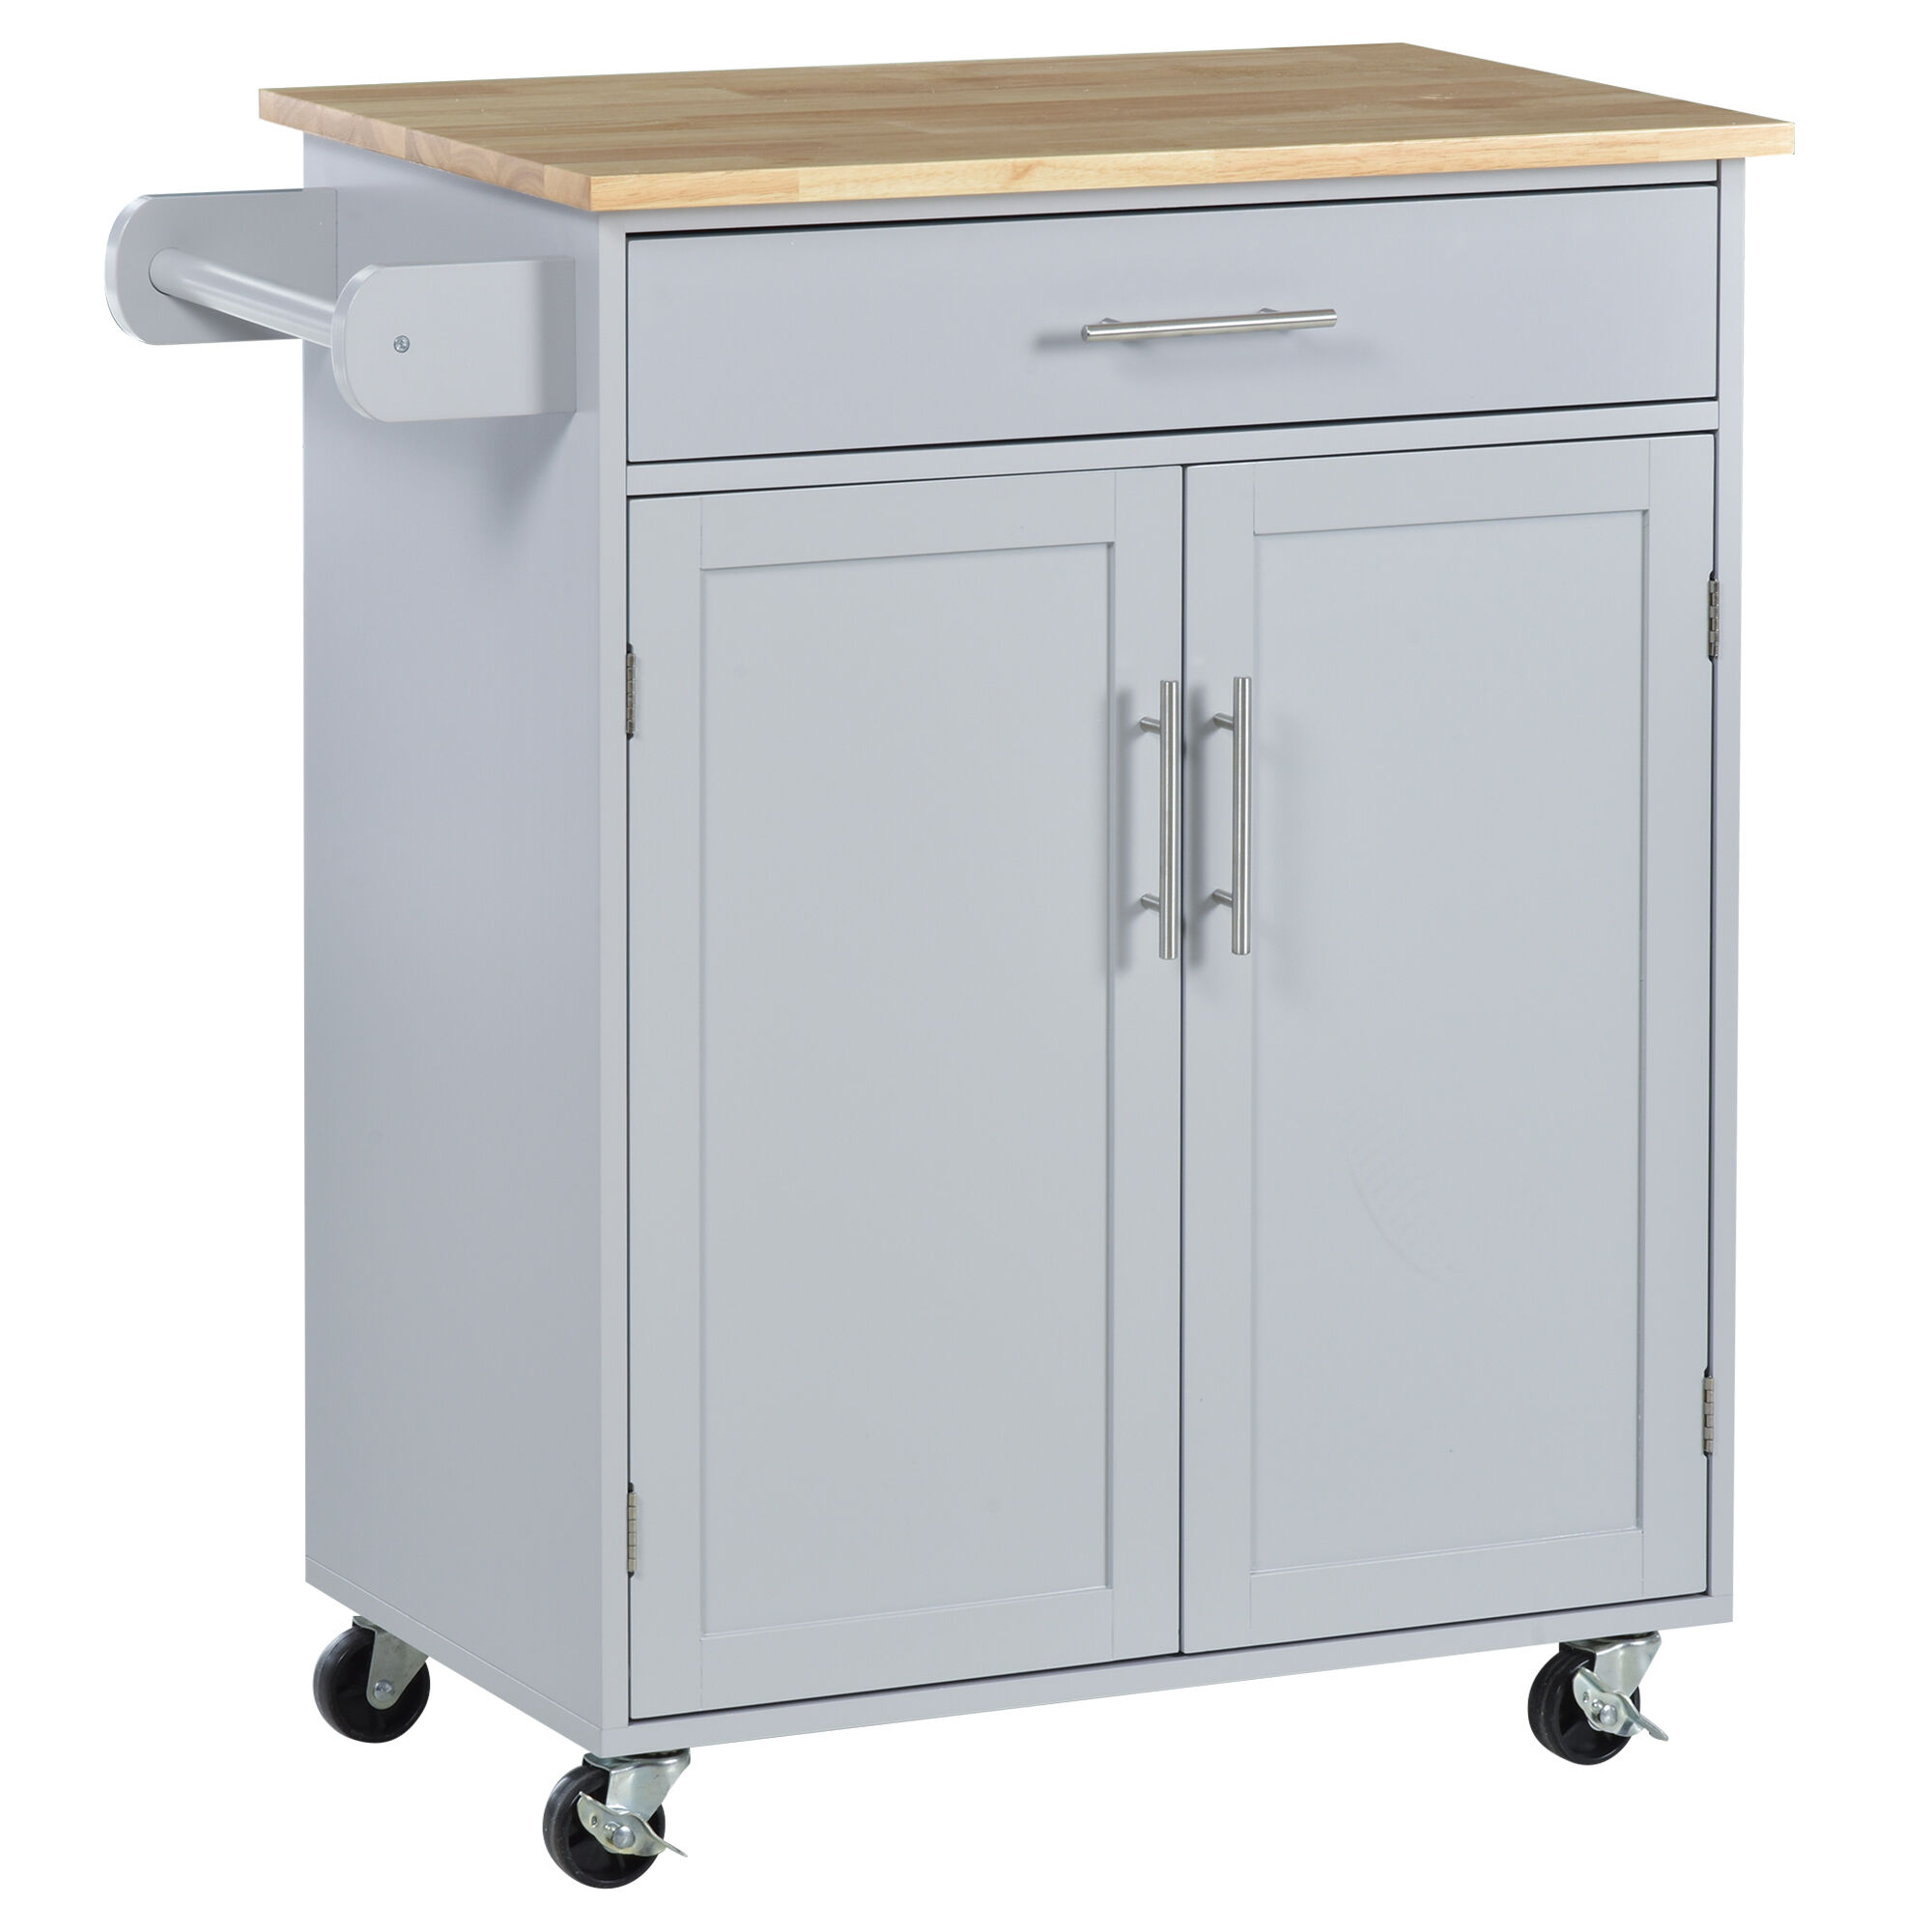 HOMCOM Portable Kitchen Island Cart, Mobile Rolling Trolley Cart with Drawer, Storage Cabinet, Towel Rack & Lockable Wheels, Gray